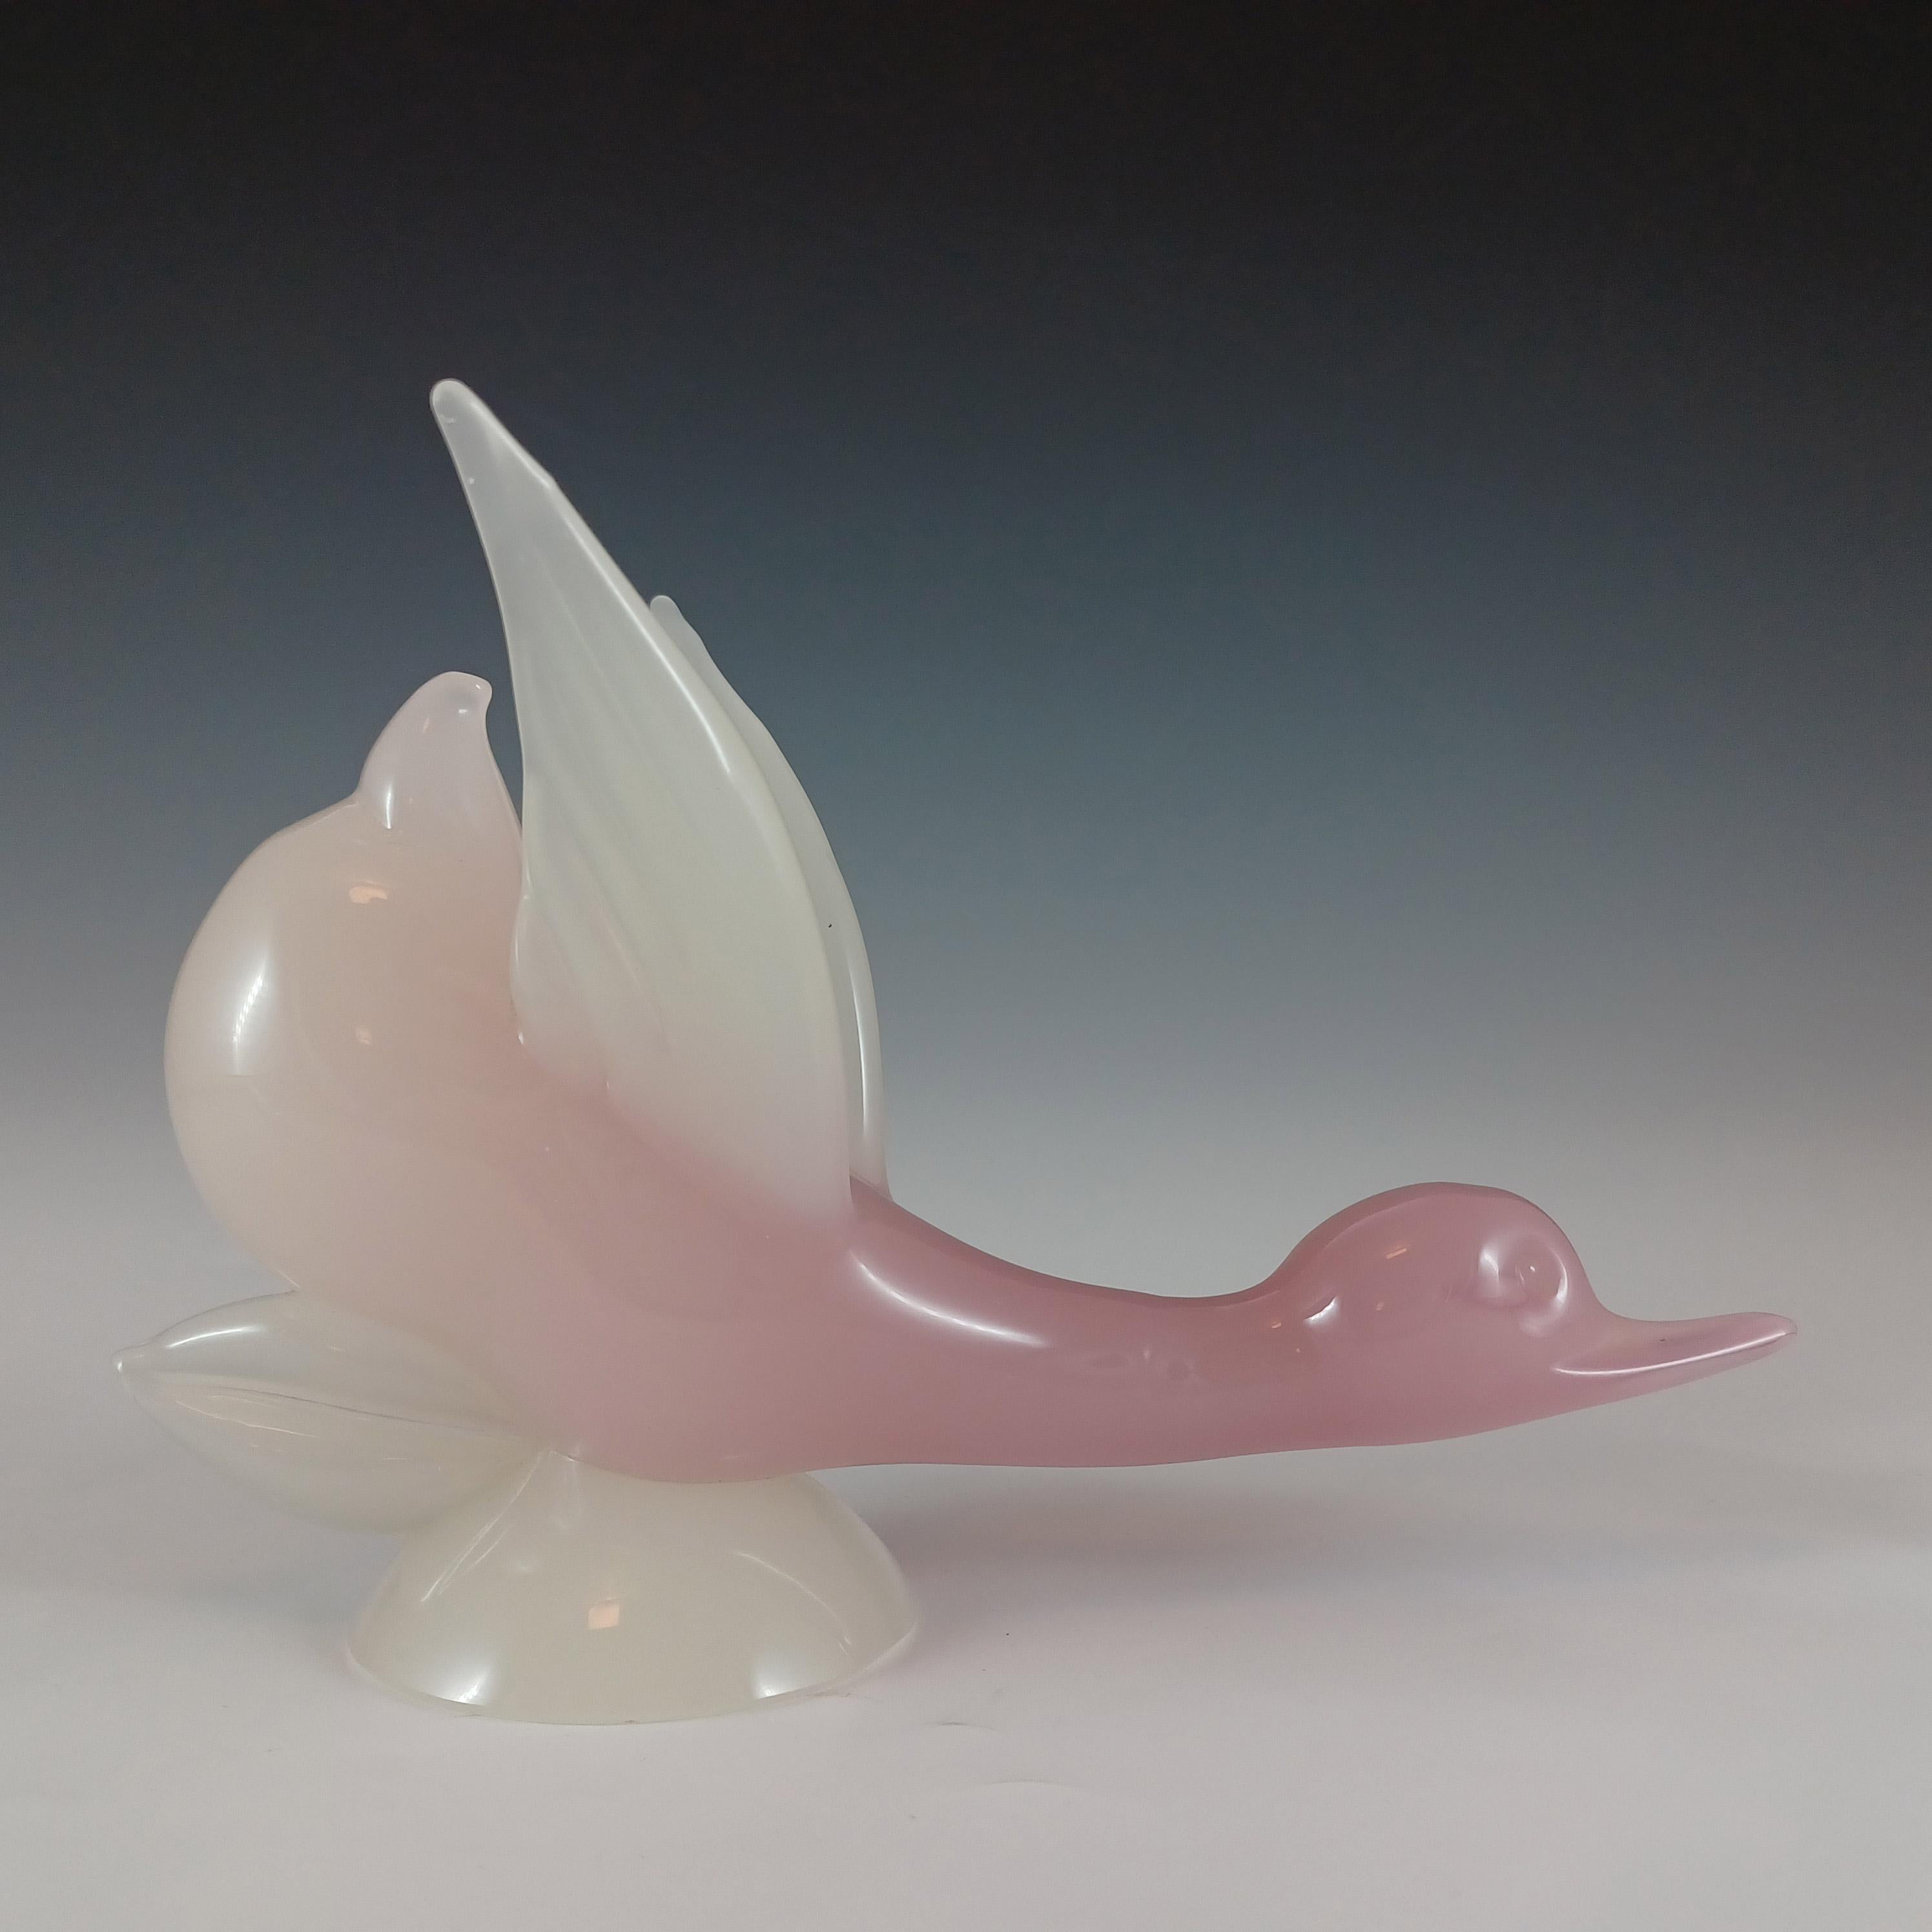 This is a magnificent 1950/60's Venetian sculptural glass duck or goose, made on the island of Murano, near Venice, Italy. In a stunning combination of opaque pink and white glass, known as alabastro glass. Unmarked, but undoubtably made by